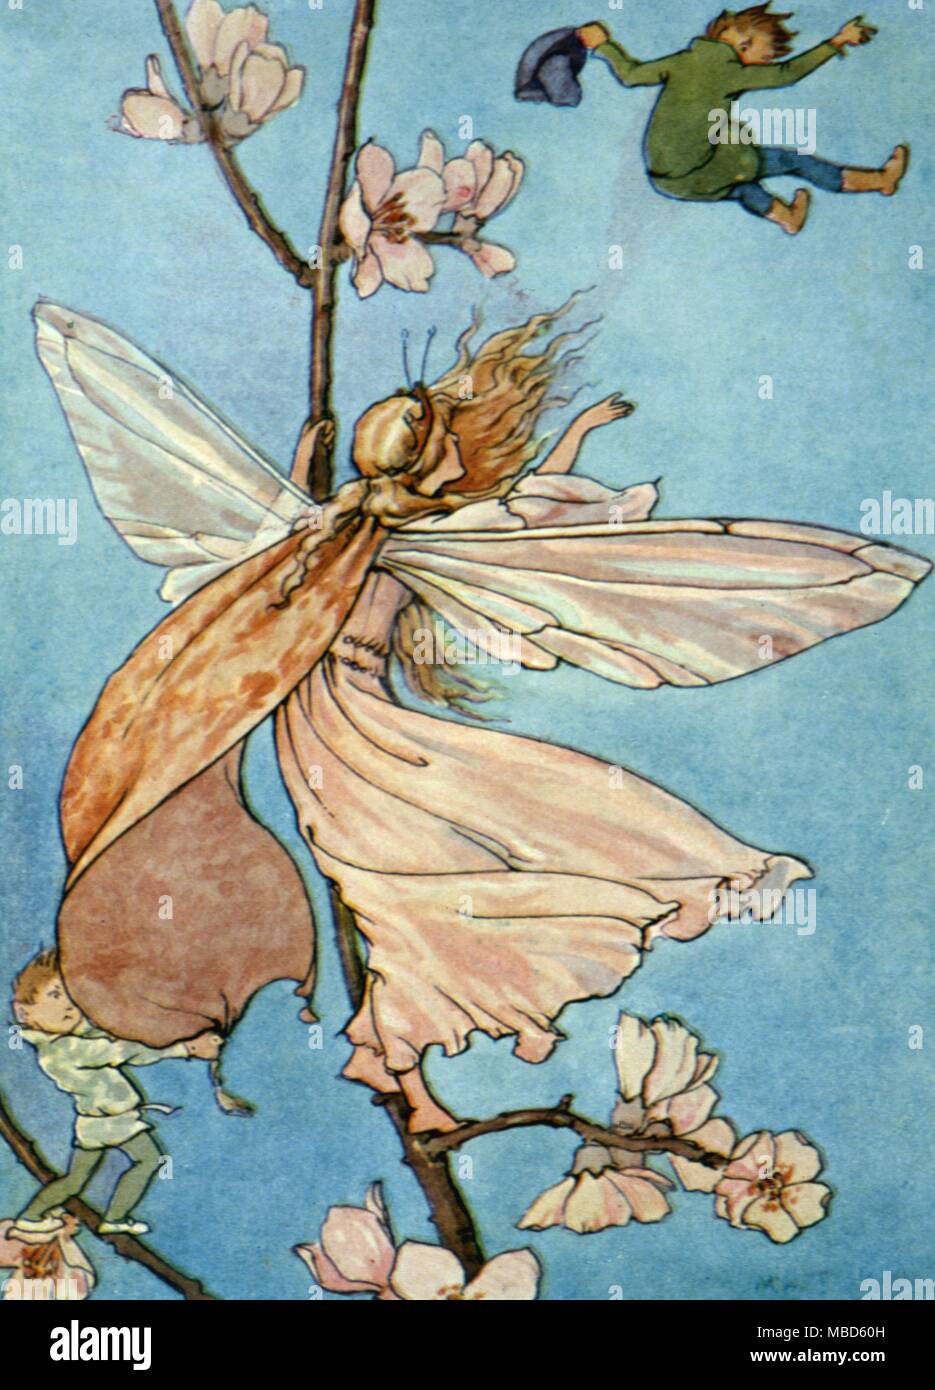 The Queen and the Fairies sent him flying. Illustration by Margaret W. Tarrant for Fairy Tales, , but circa 1920 Stock Photo